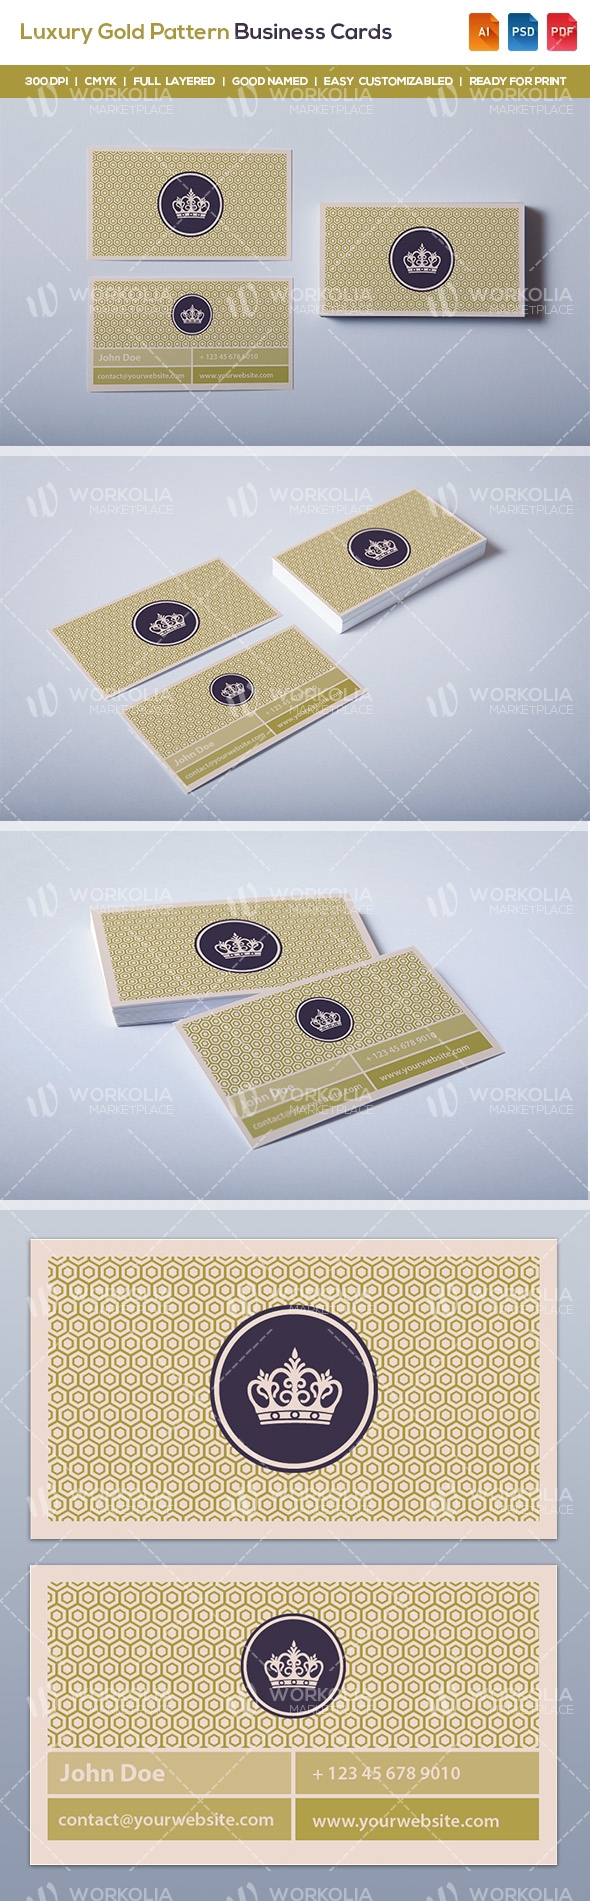 businesscard businesscards luxury gold businees card Business Cards